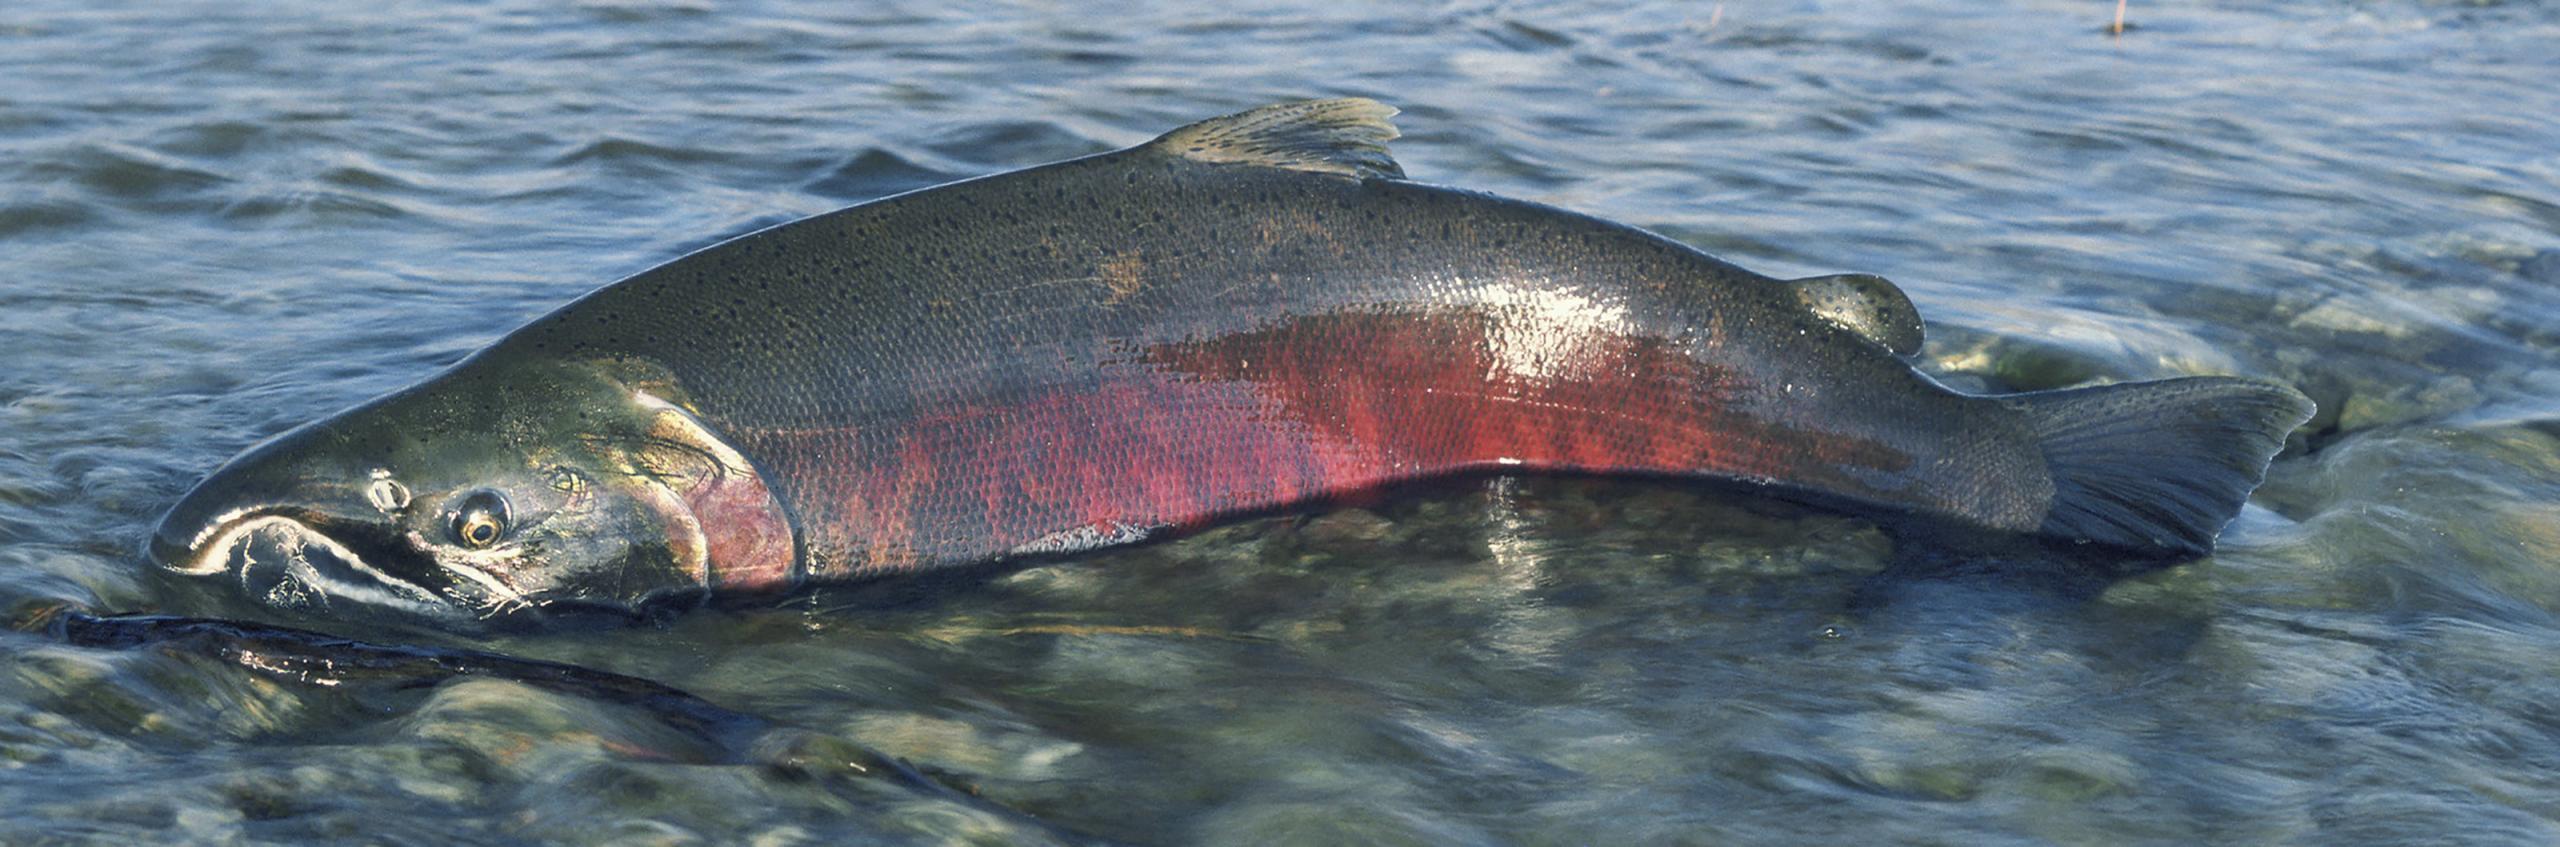 A Chinook salmon only half submerged in a shallow stream. The lower parts of the salmon are very red.